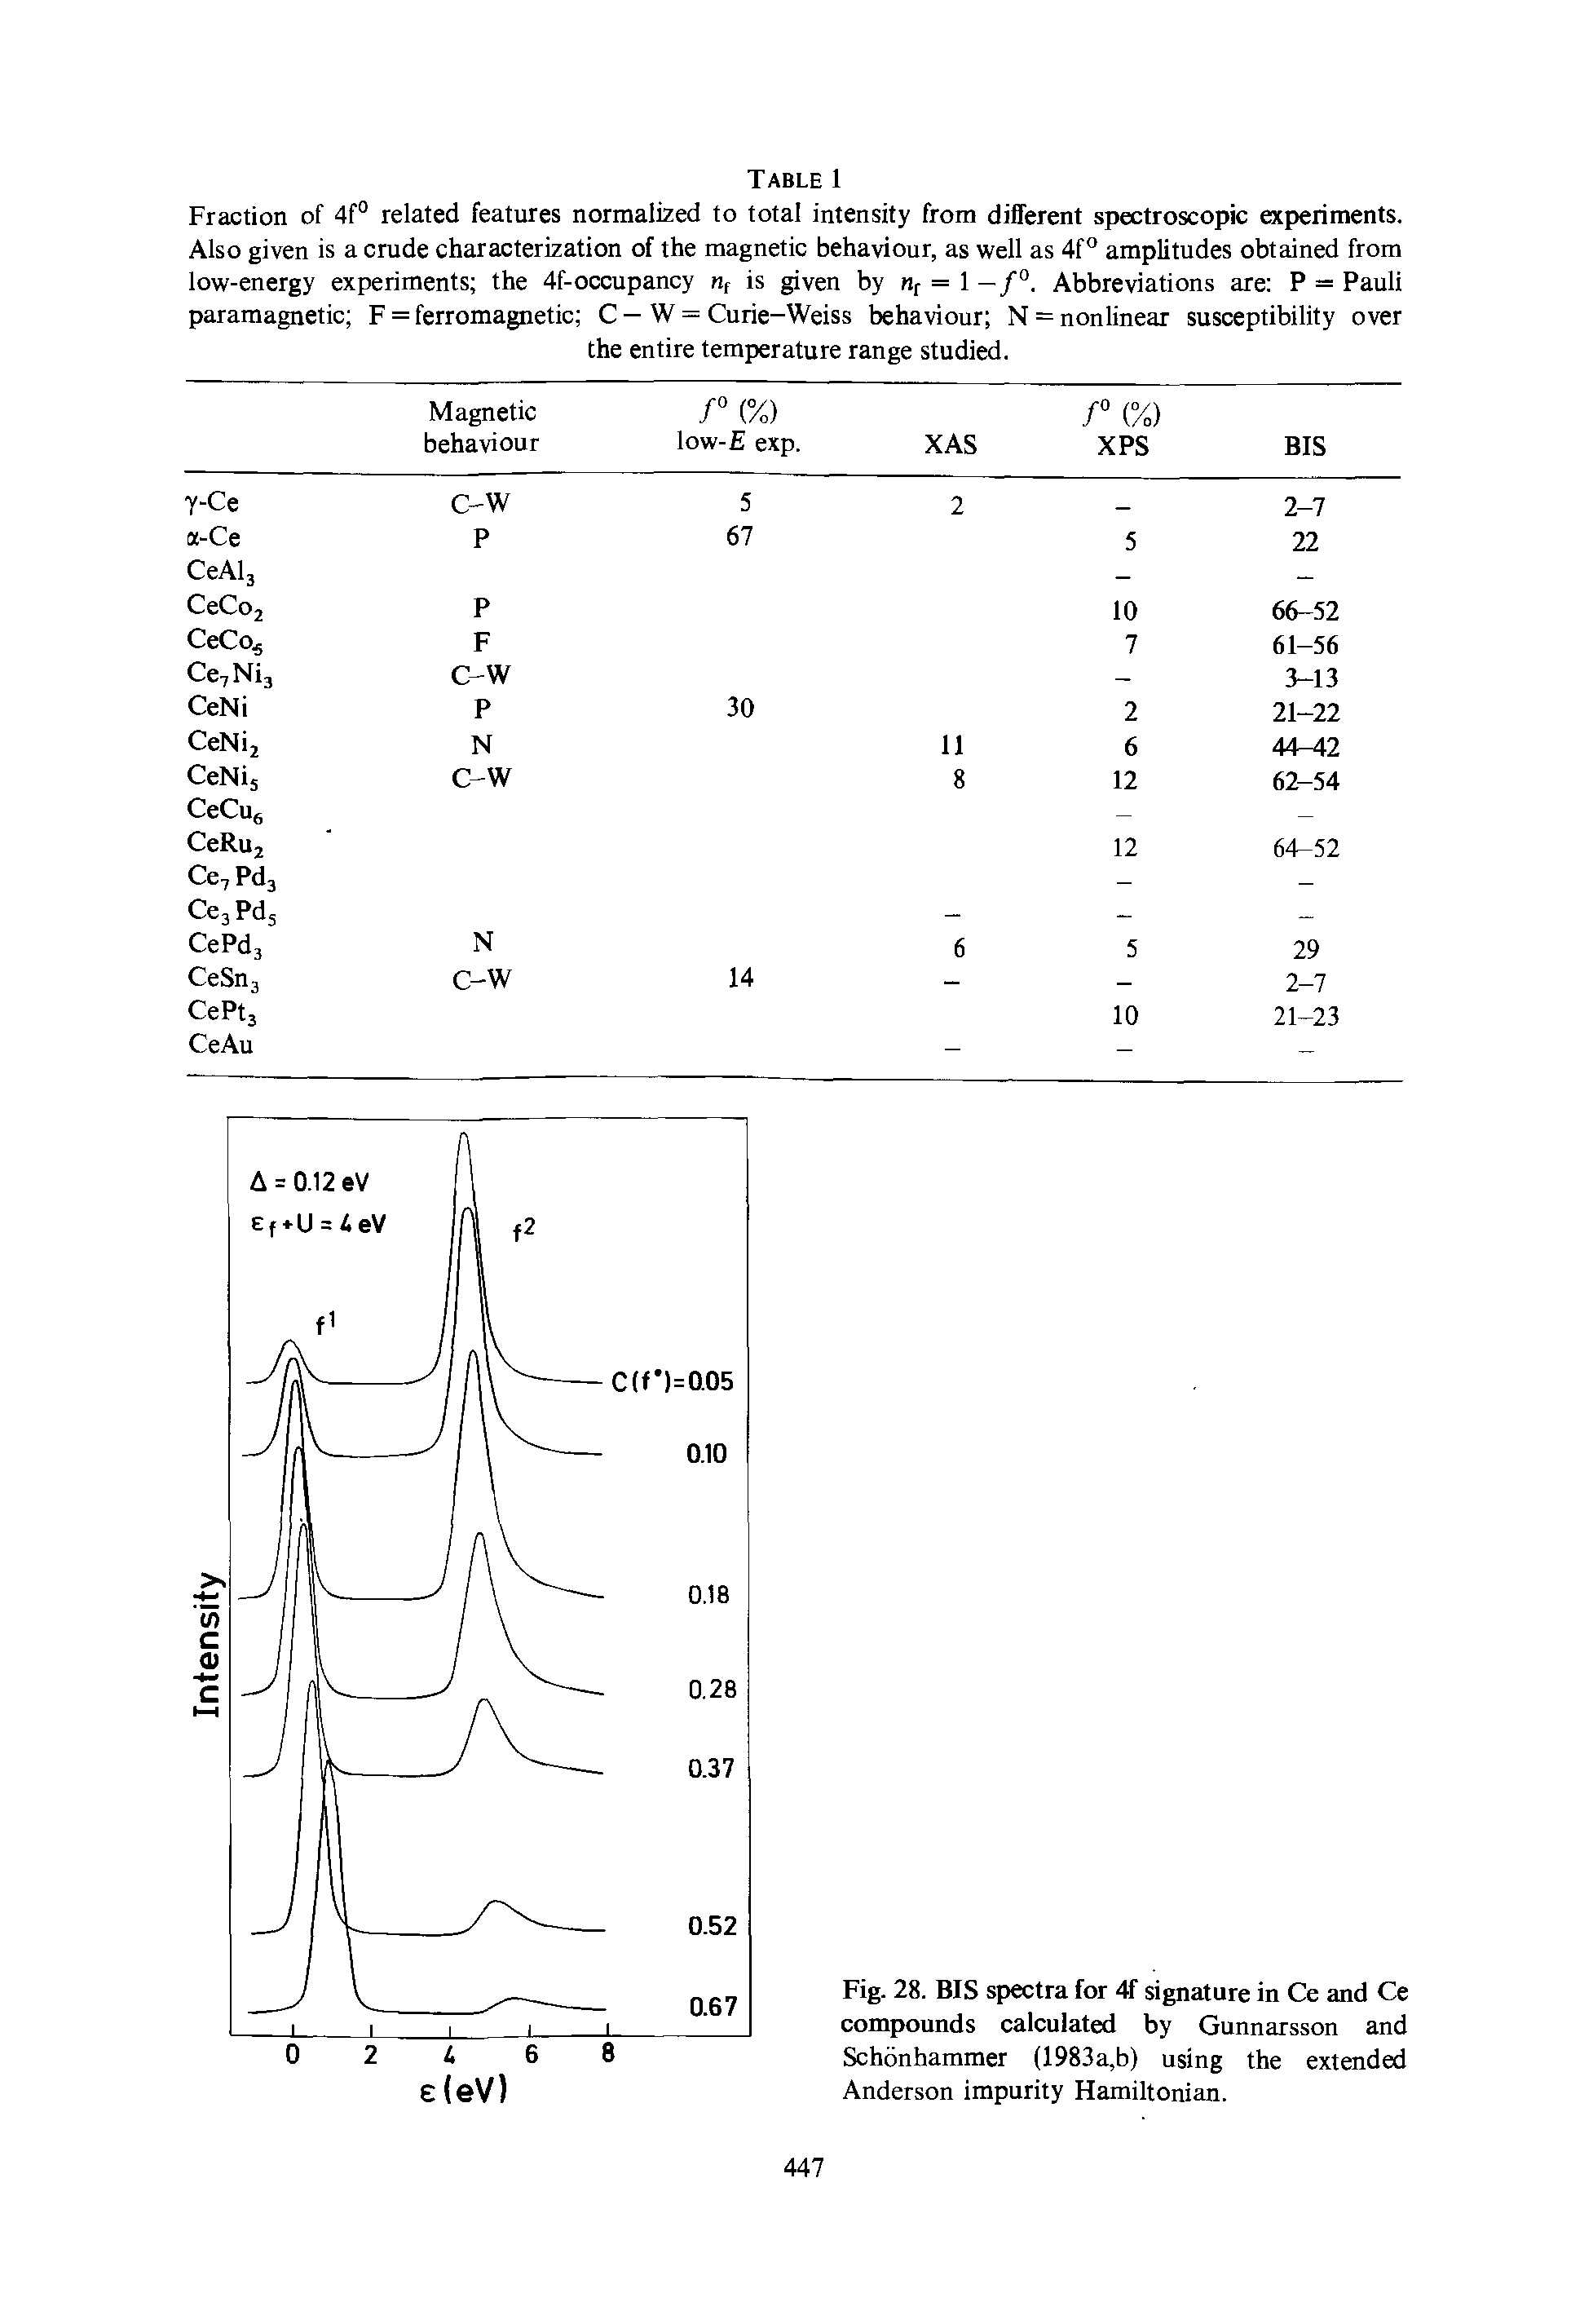 Fig. 28. BIS spectra for 4f signature in Ce and Ce compounds calculated by Gunnarsson and Schonhammer (1983a,b) using the extended Anderson impurity Hamiltonian.